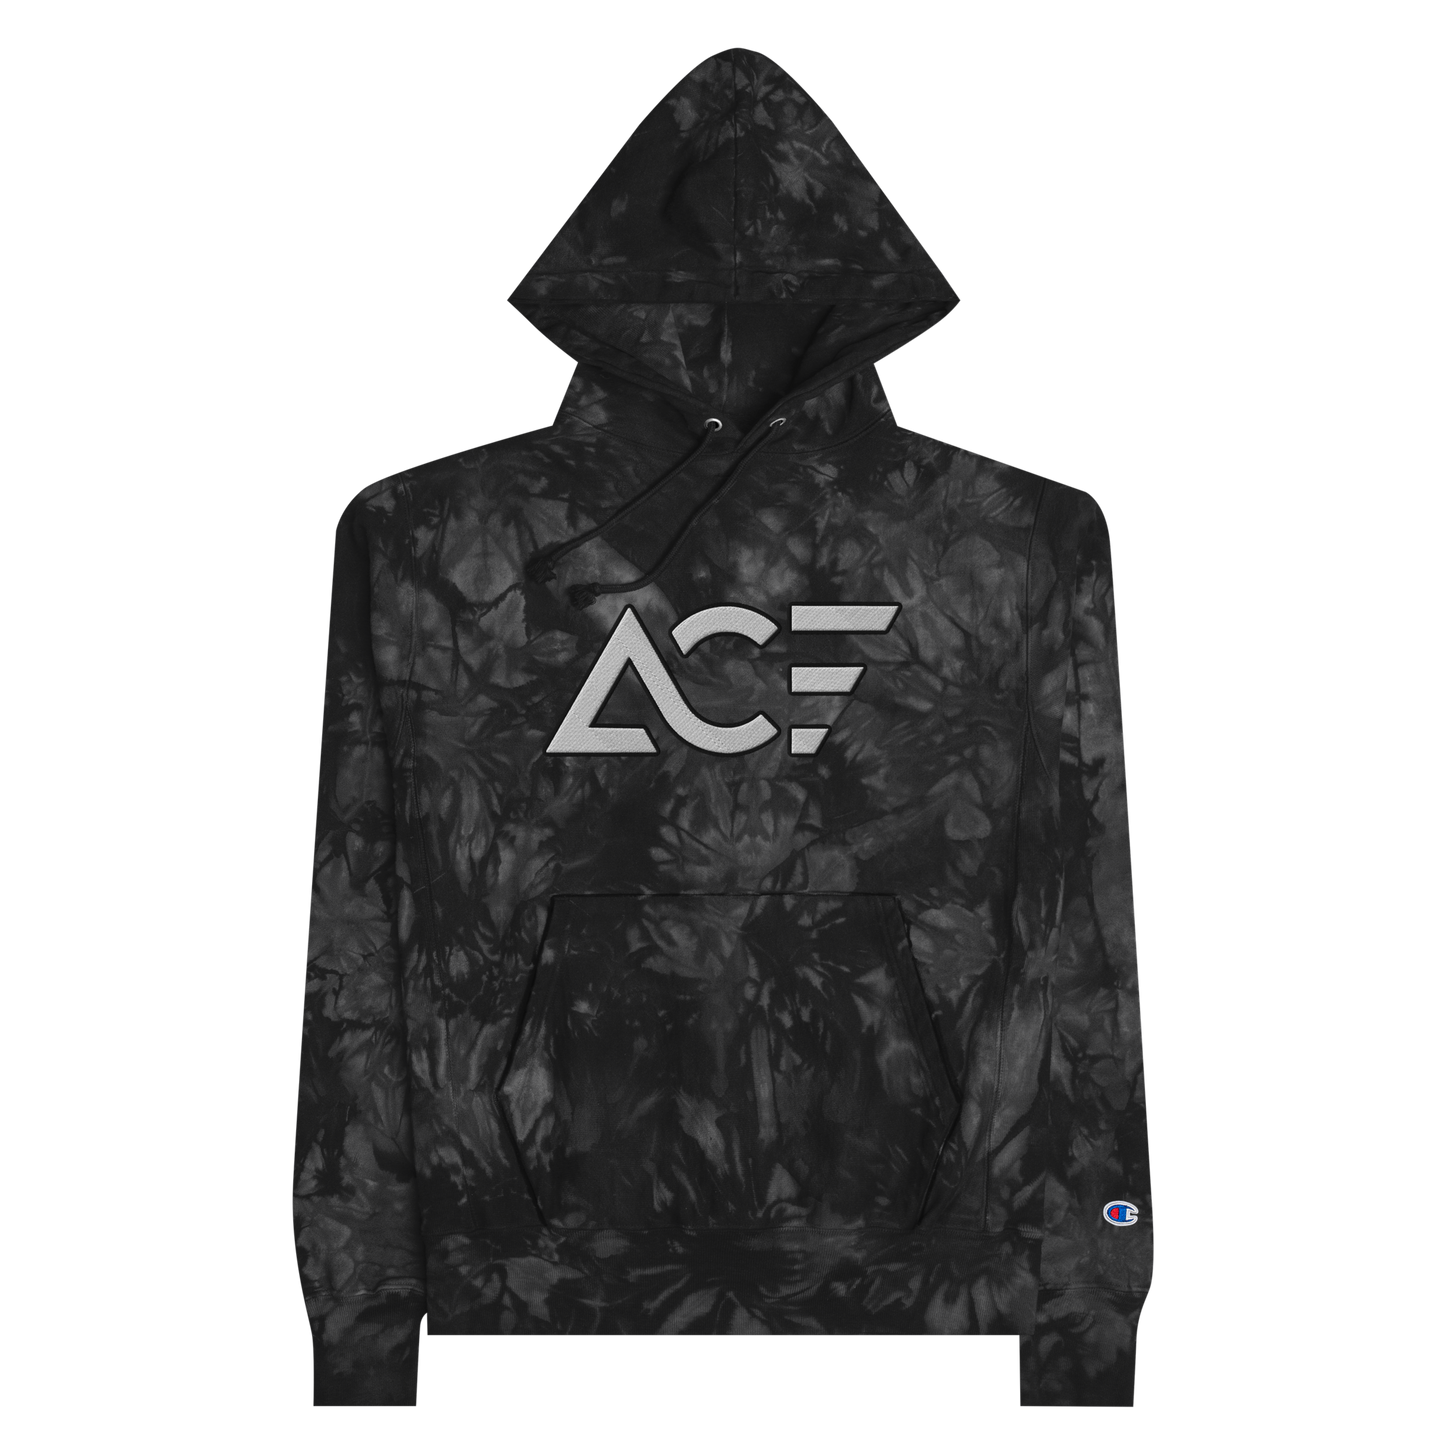 ACE EMBROIDERED CHAMPION TIE-DYE HOODIE